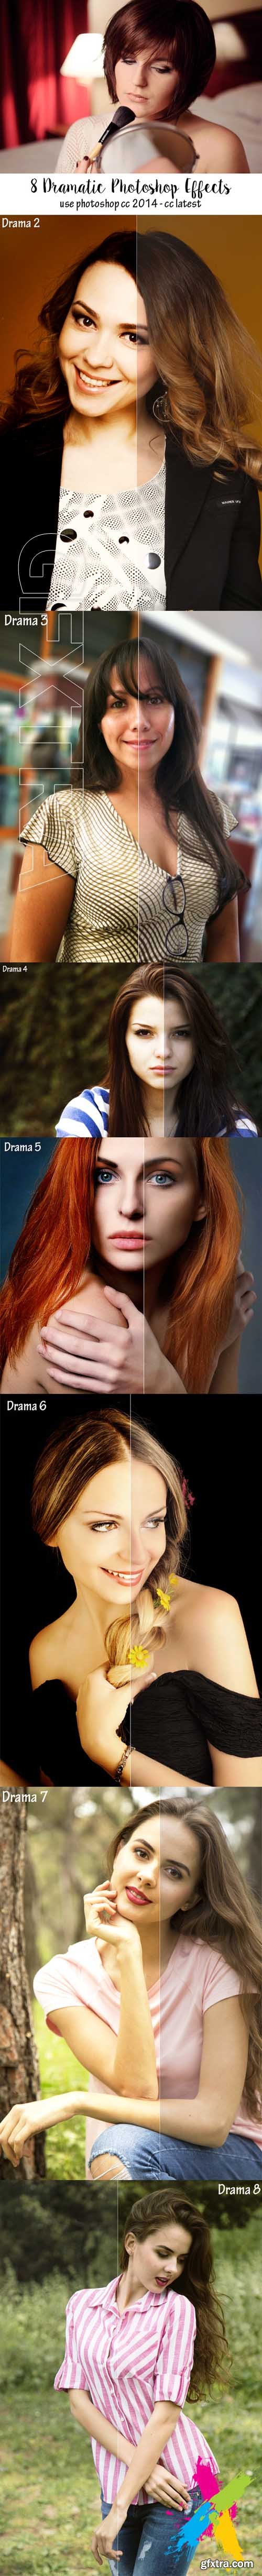 Graphicriver - 8 Dramatic Photoshop Effects 20215910